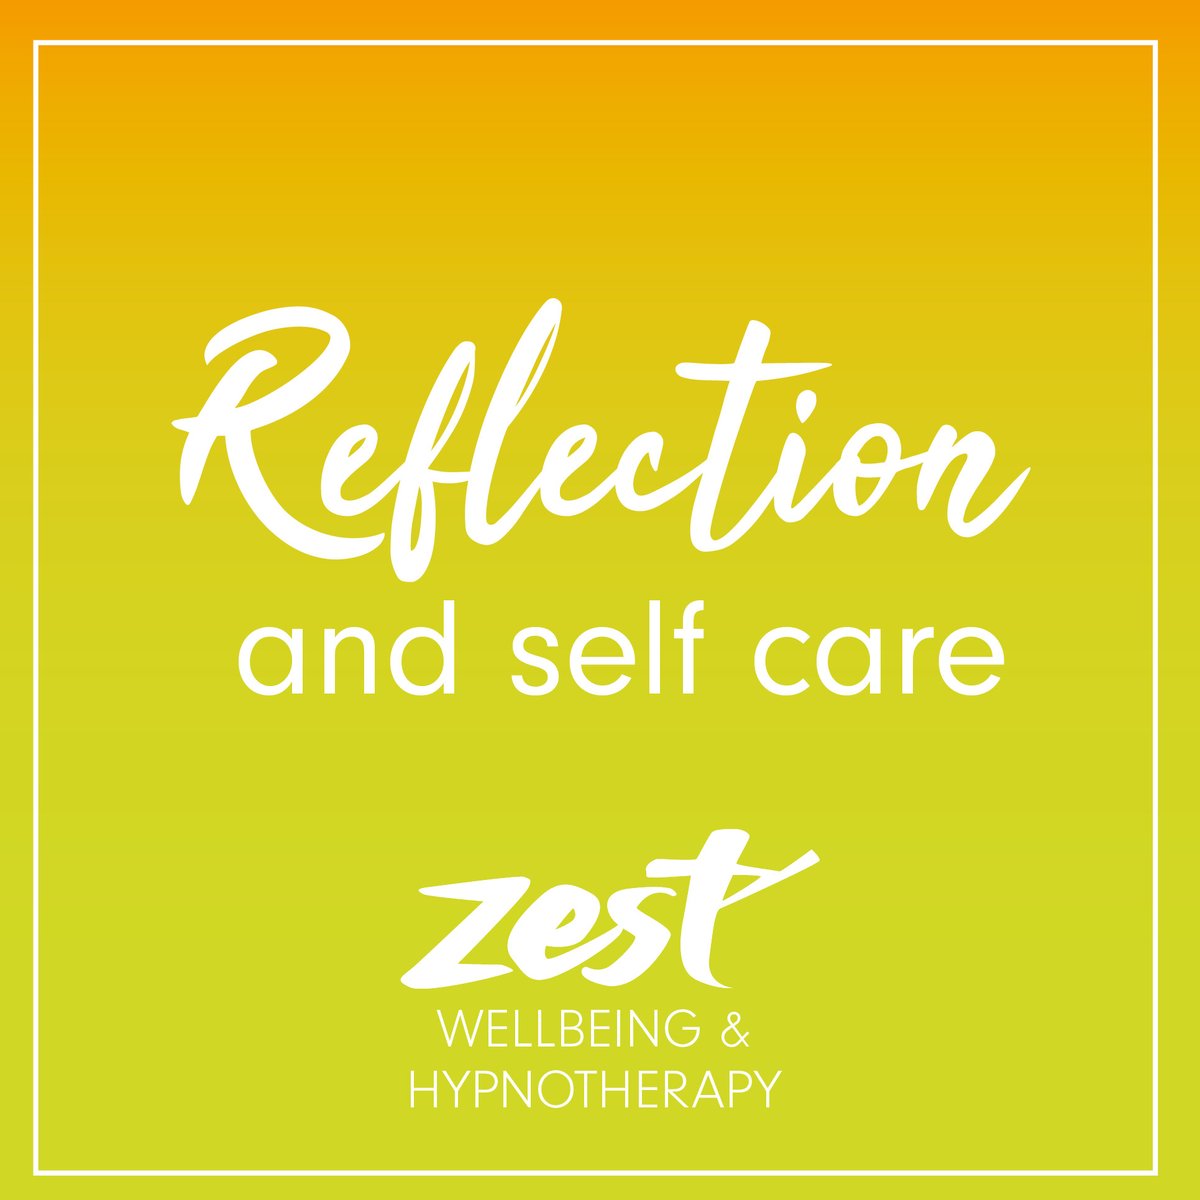 It's important to take self-care seriously. The next month could become more challenging for some of us in many different ways.
Contact me for a free initial consultation to see how Zest Wellbeing and Hypnotherapy (online) can help you.
zestwellbeing.co.uk